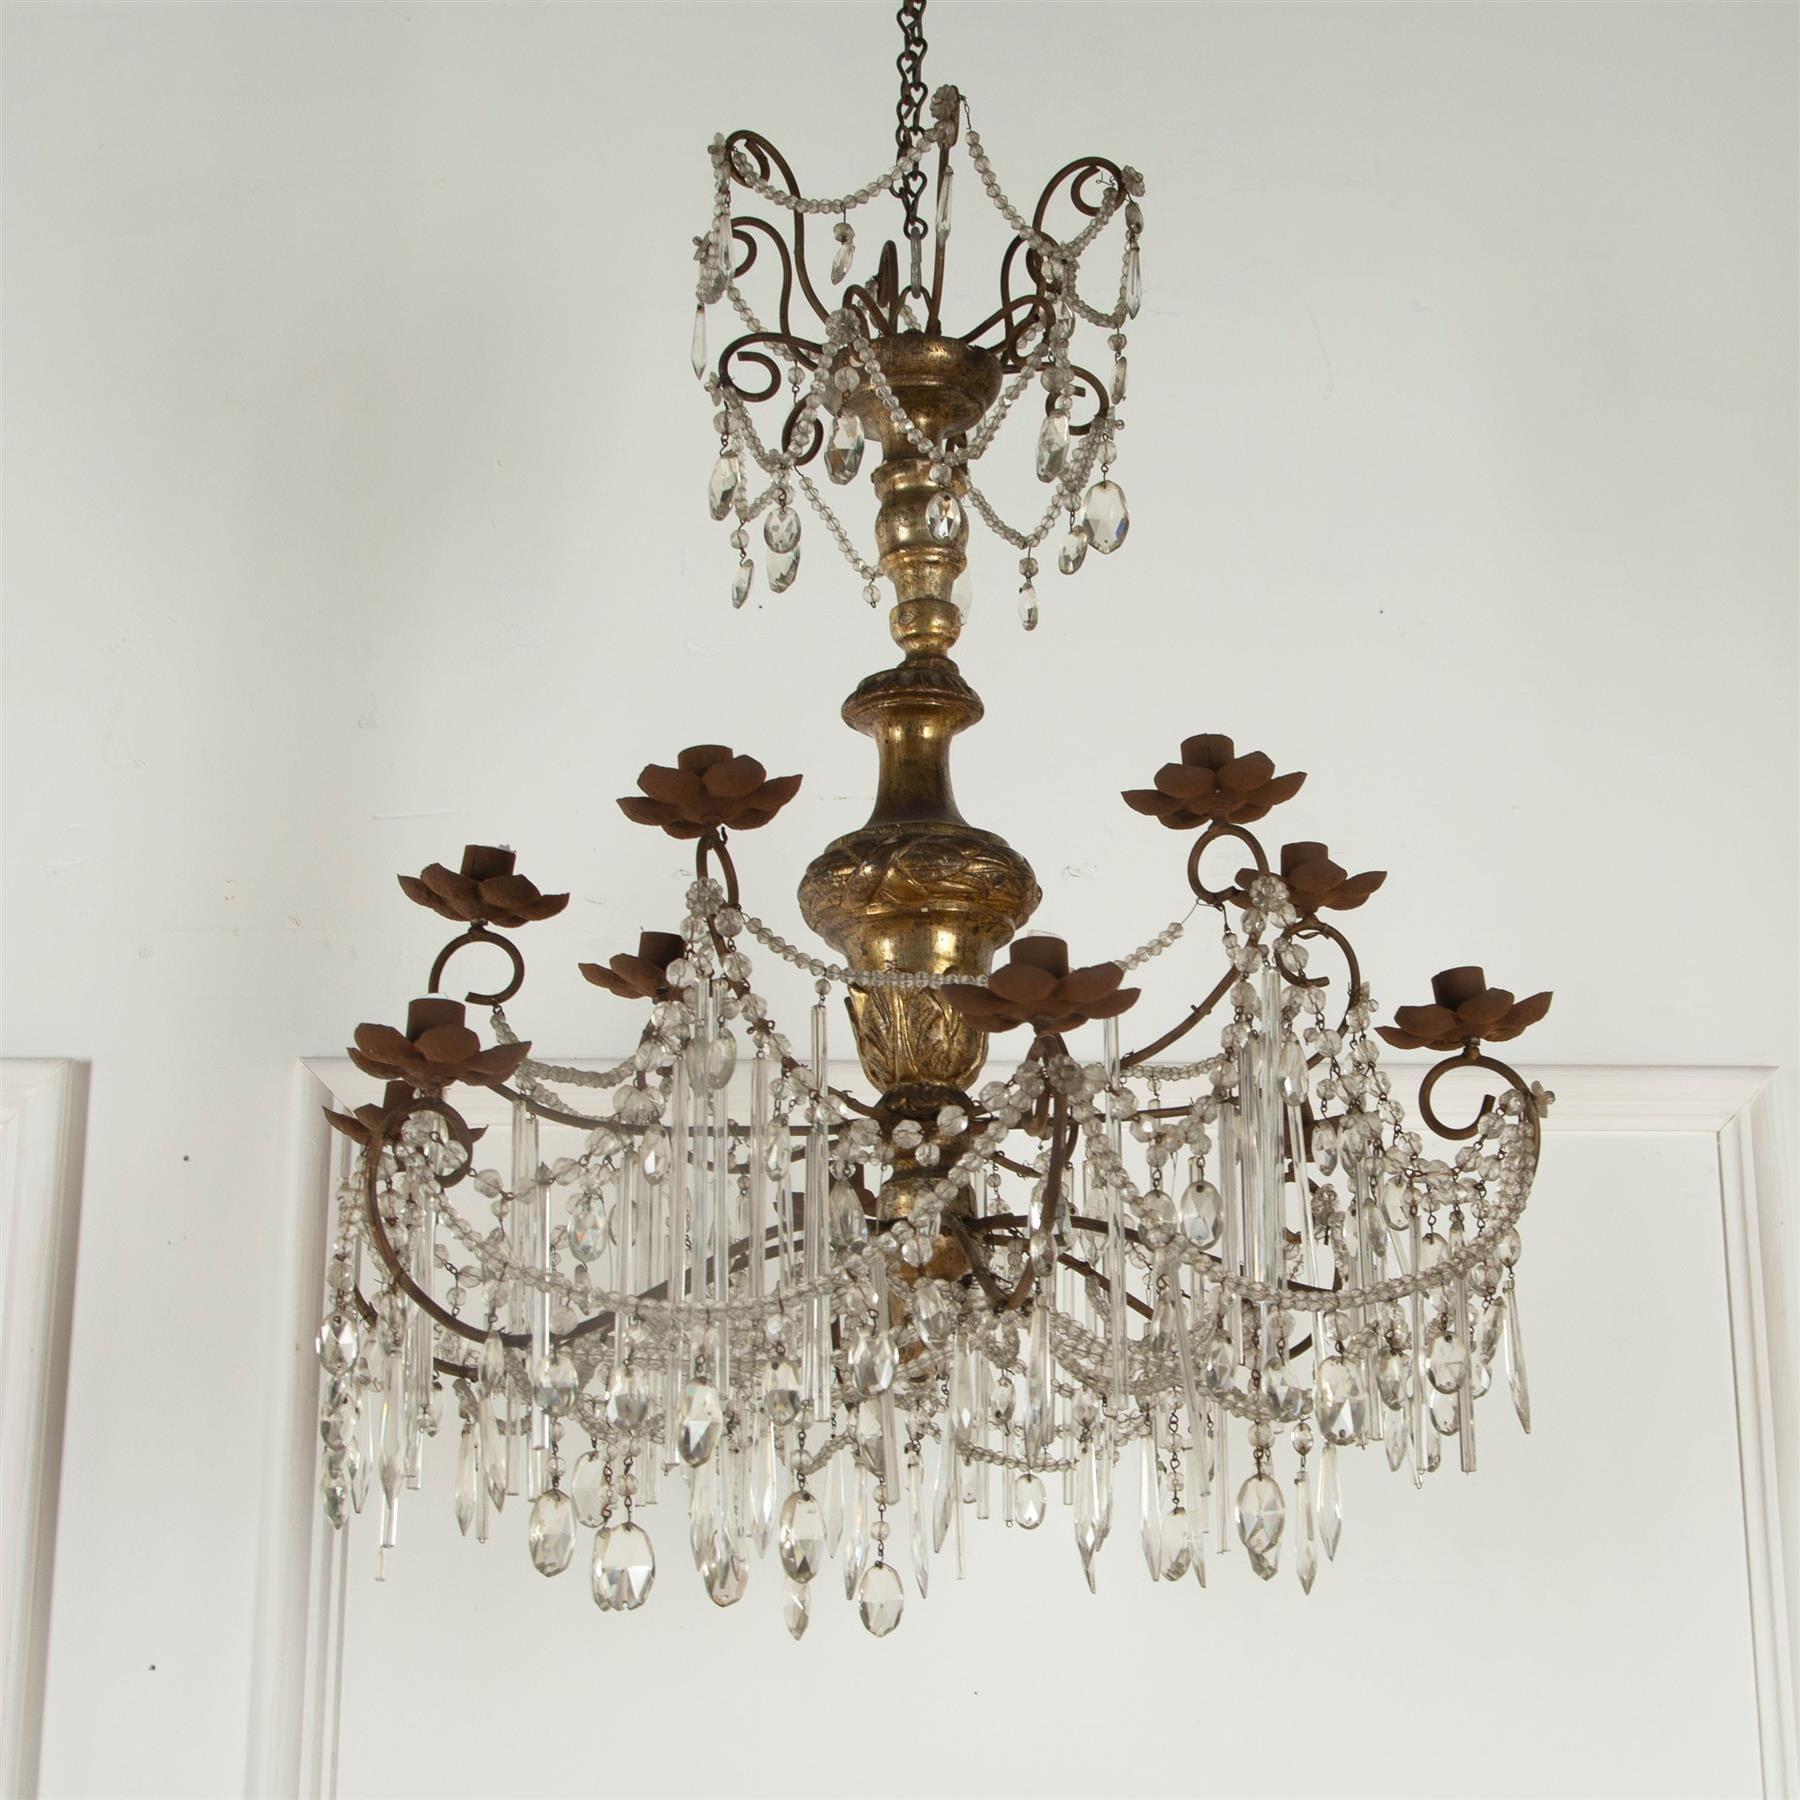 A 19th century Italian chandelier of the carved and silvered center stem, redressed with glass, mid-20th century. Currently unwired for use with candles.